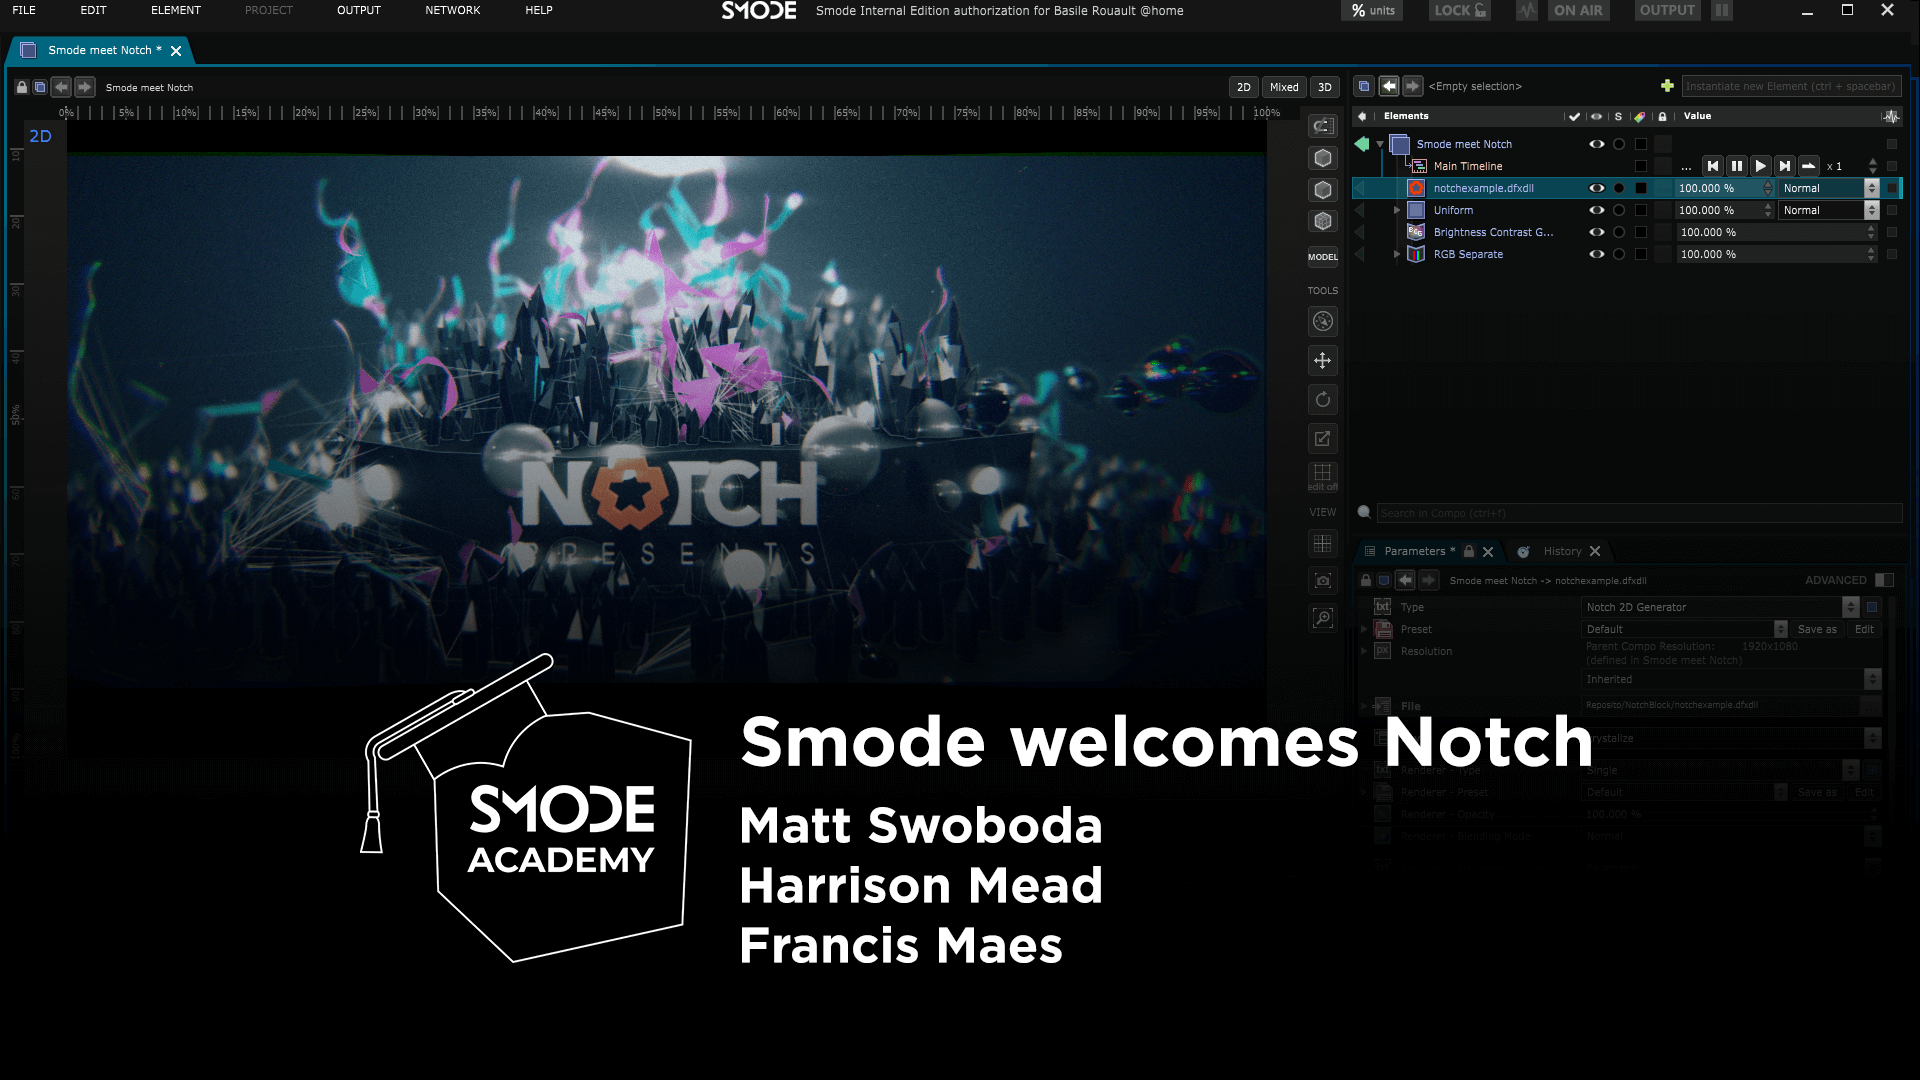 Smode welcomes Notch